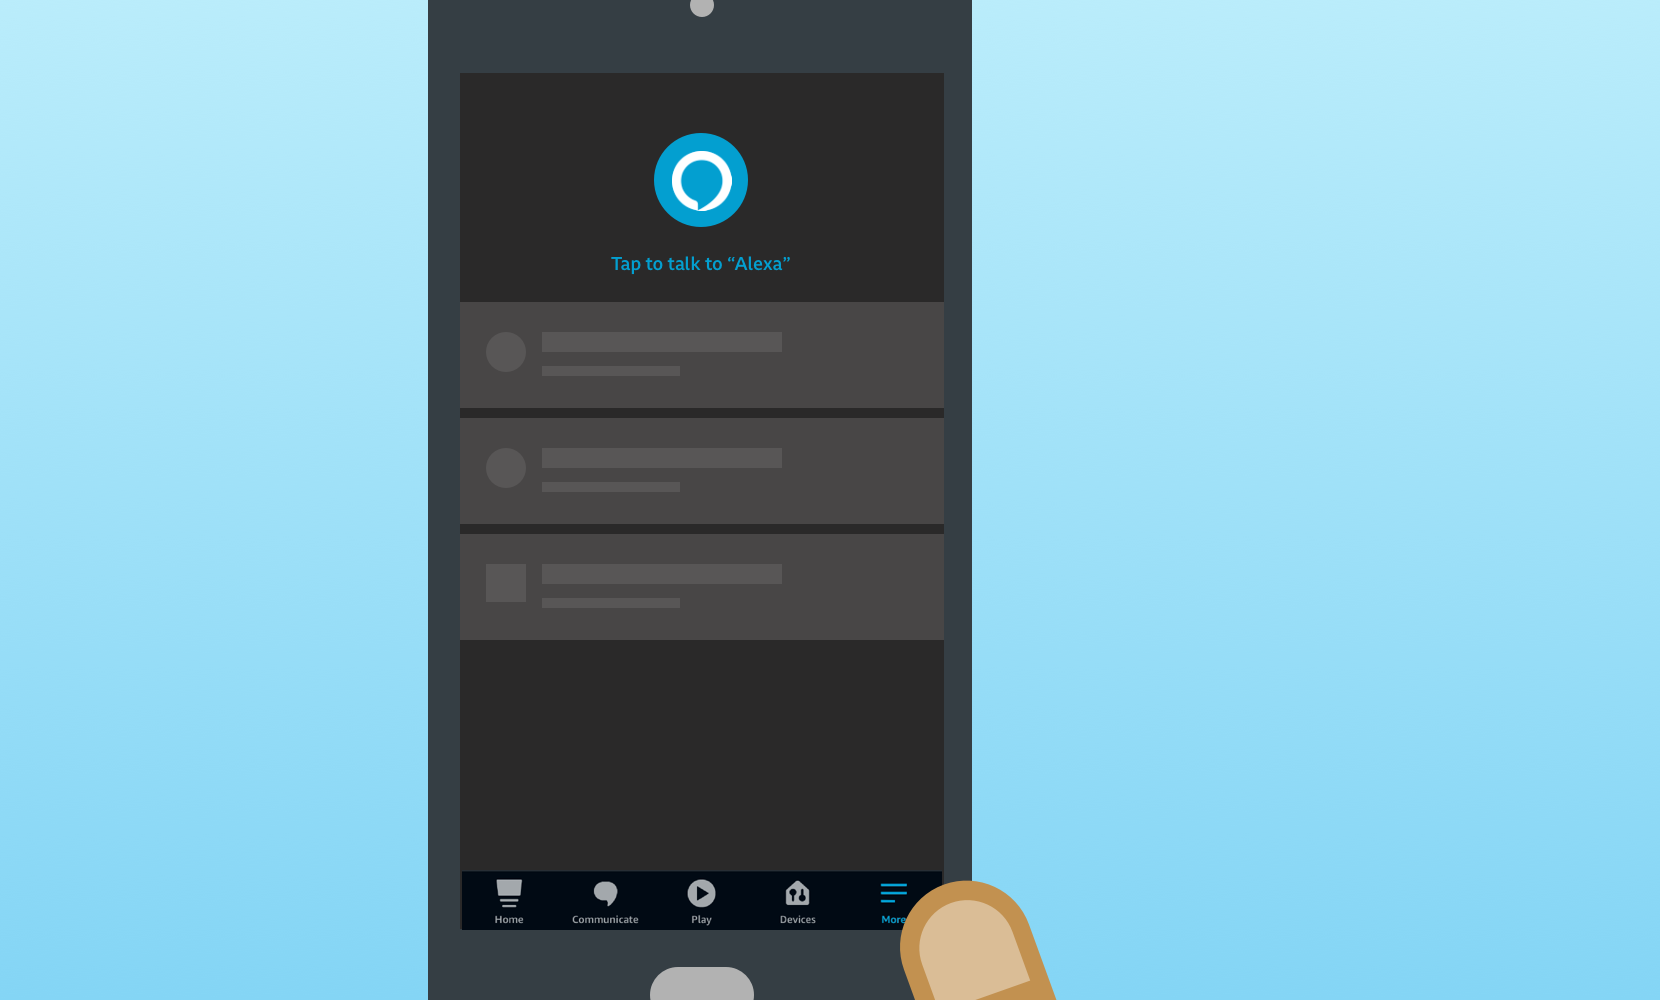 Illustration of a phone screen with the Alexa logo saying 'Tap to talk to Alexa' at the top of the screen